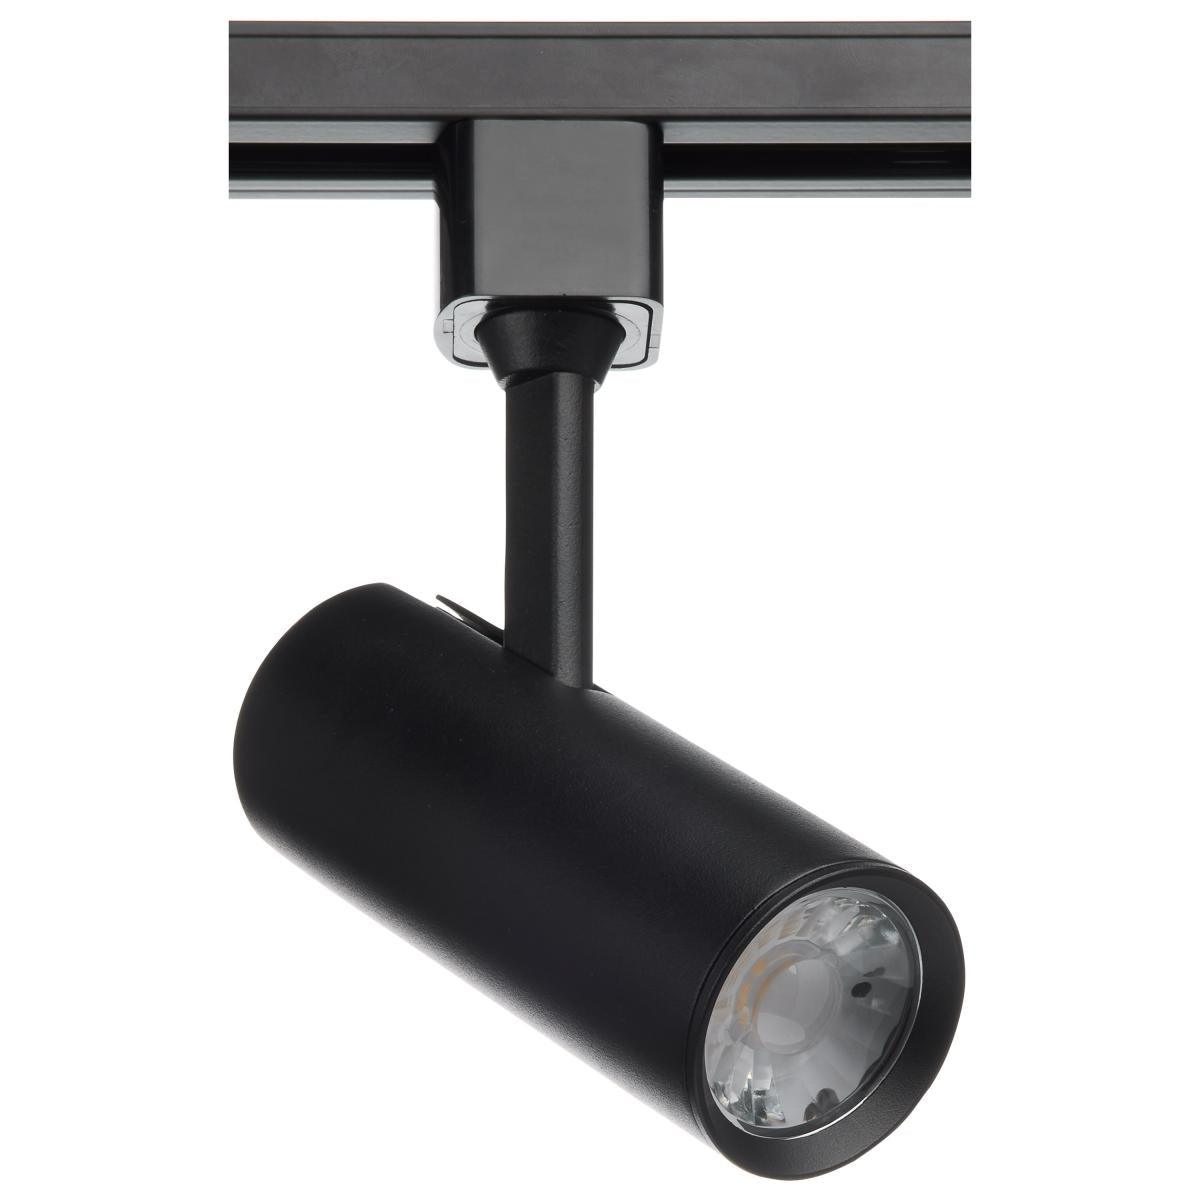 Pro LED Commercial Track Head, 10W, 3000K, 600 Lumens, Halo (H) - Bees Lighting